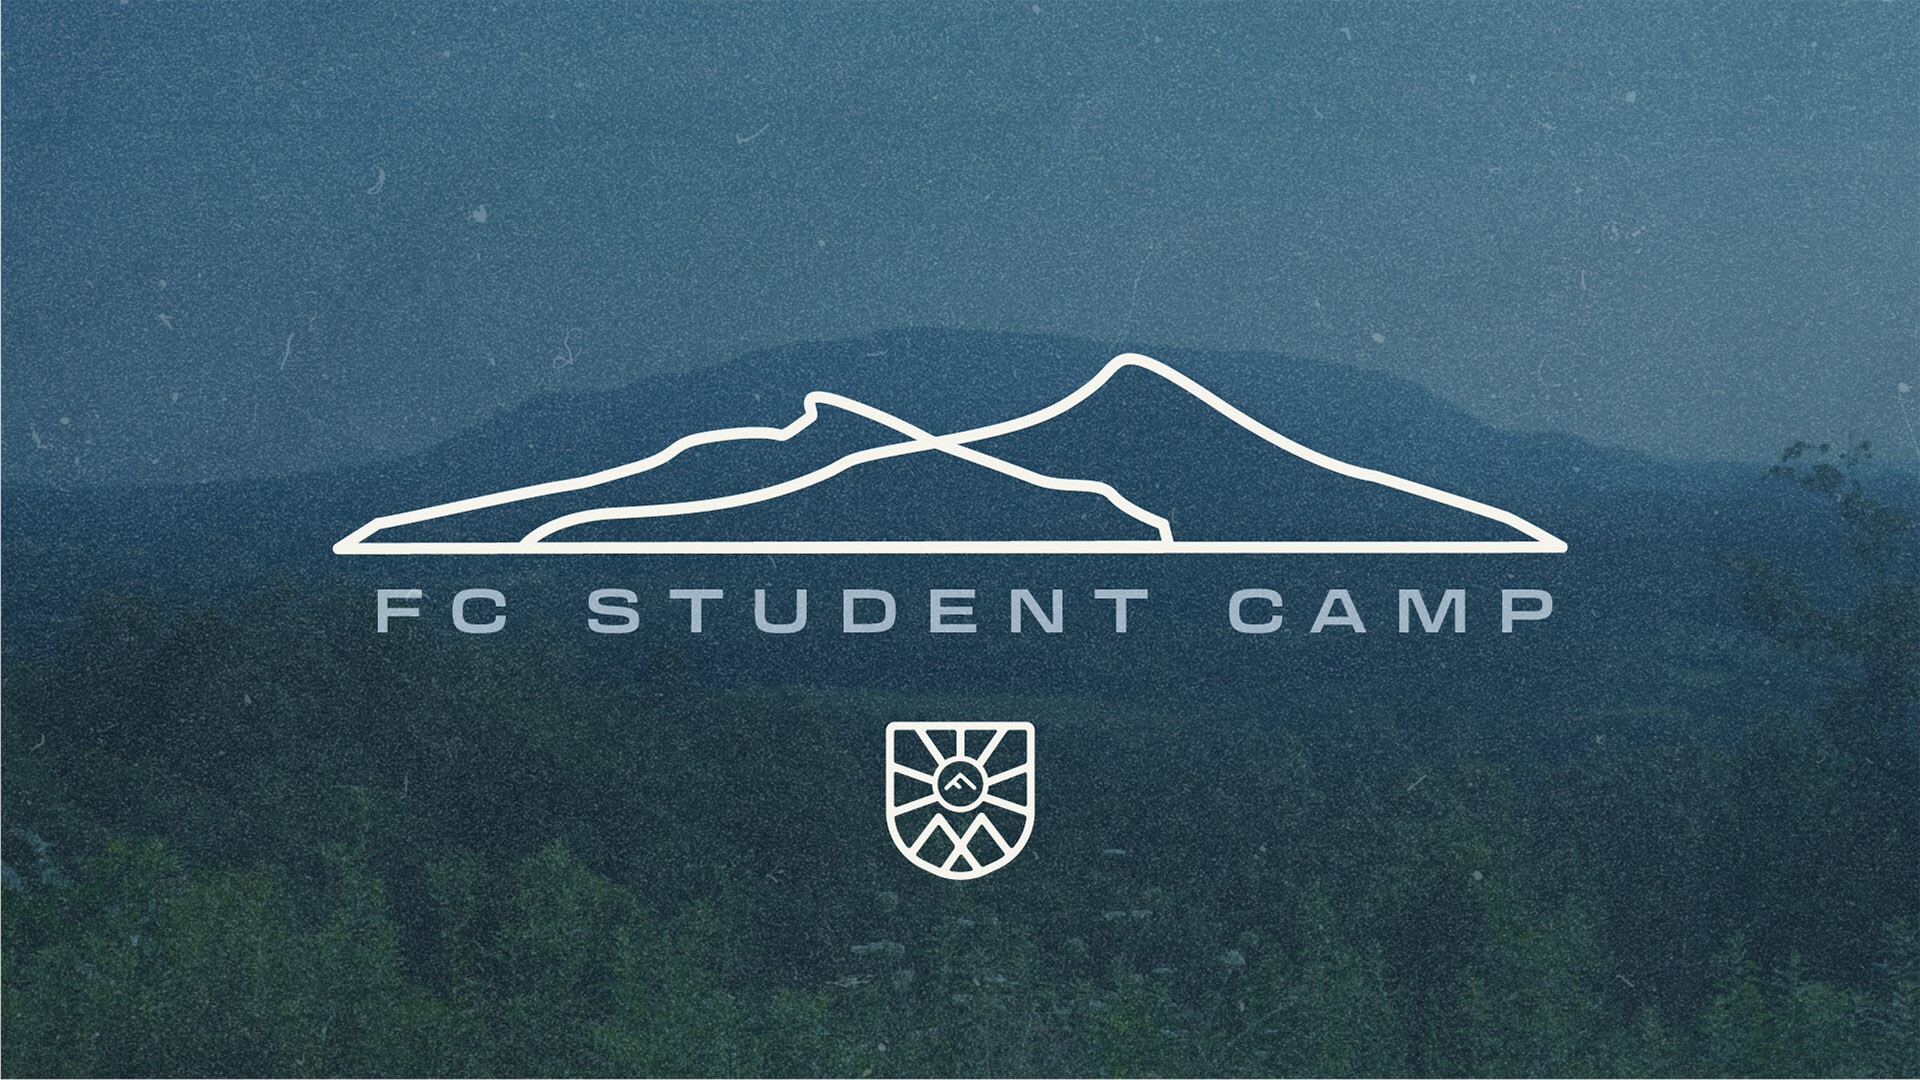 Summer Camp Graphic